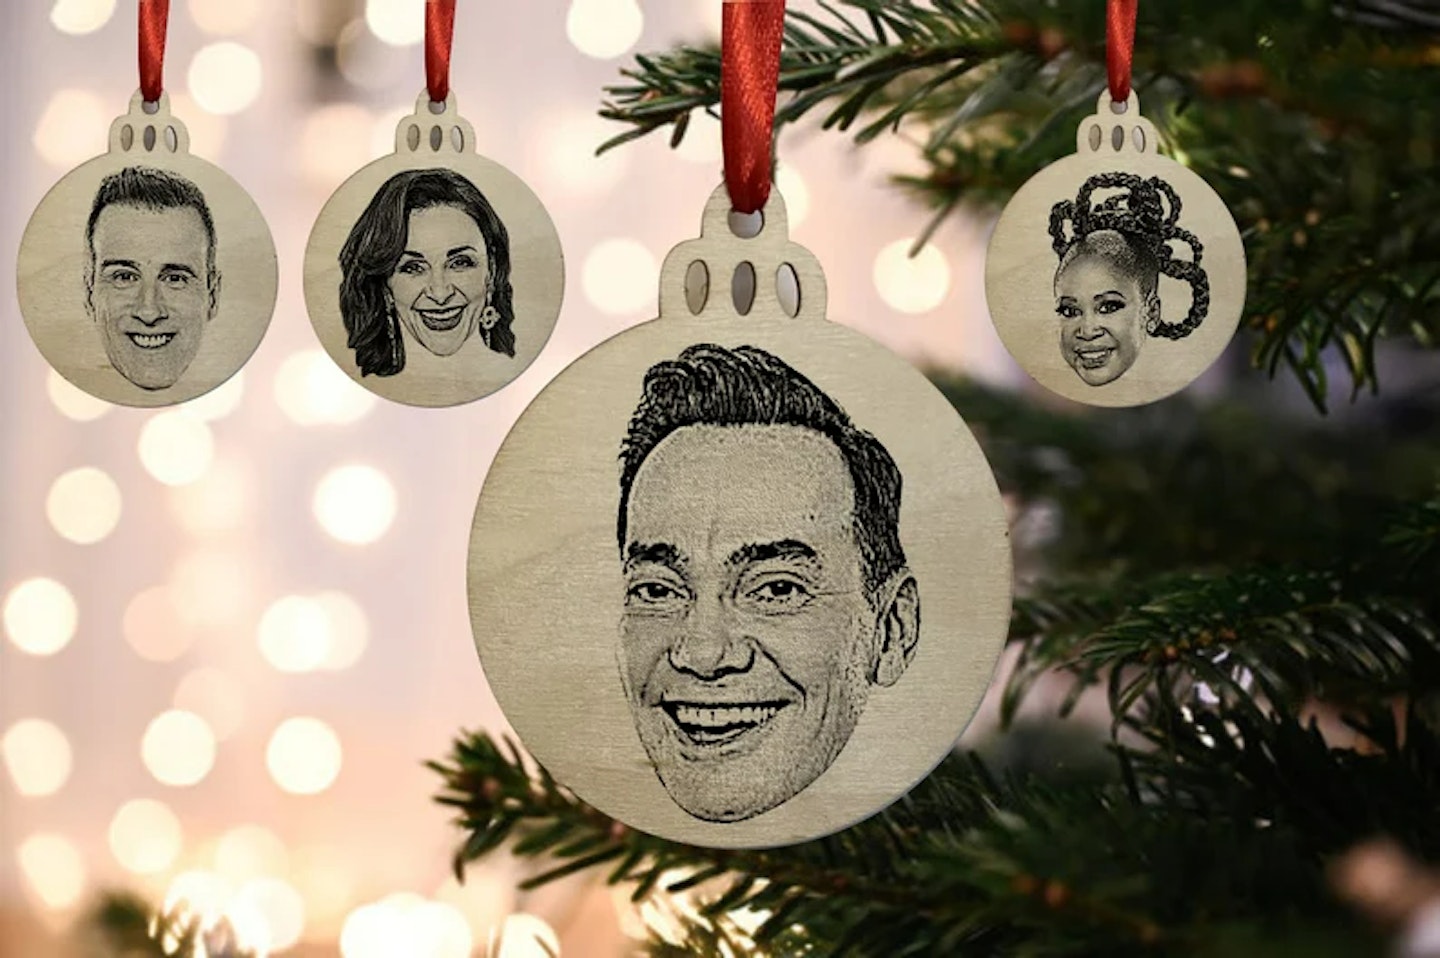 Strictly Come Dancing Judge's Faces Engraved On Wooden Christmas Baubles